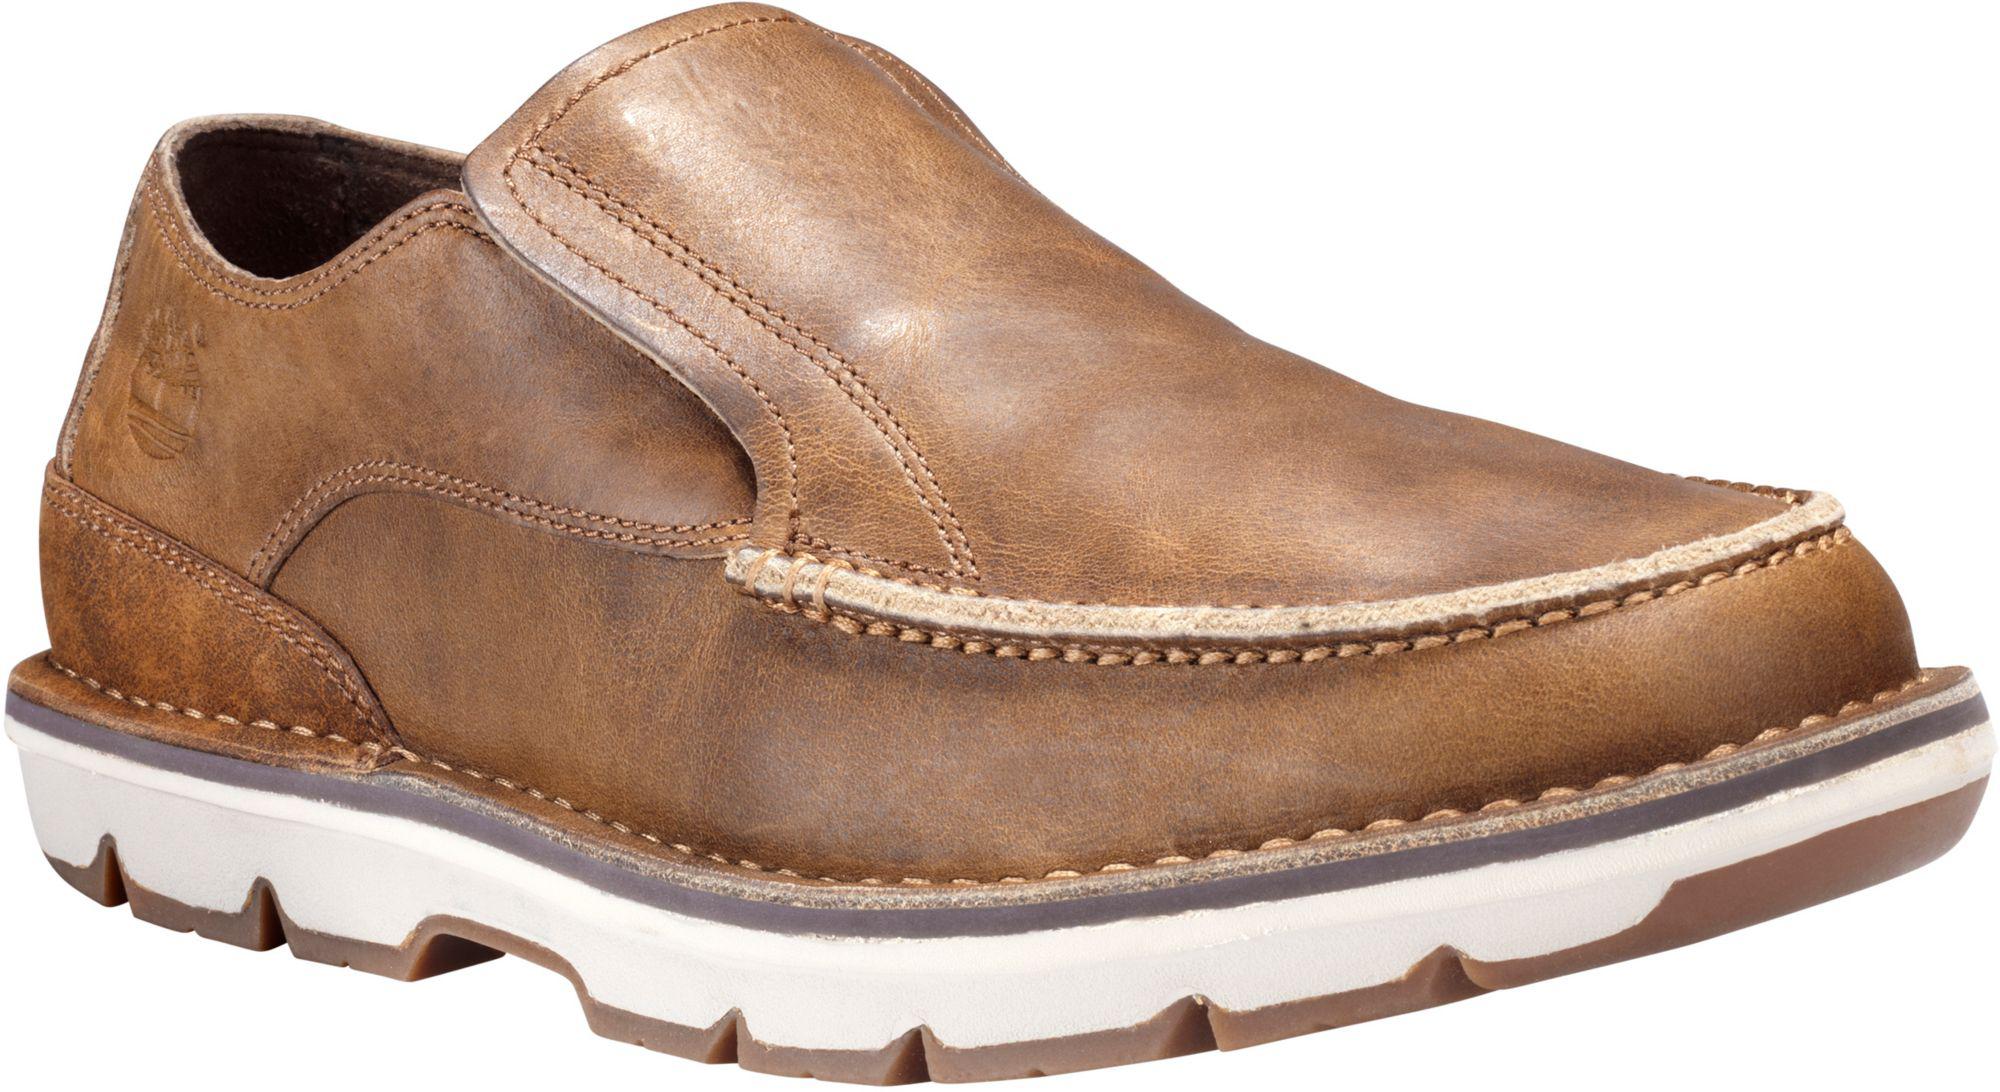 Timberland Leather Coltin Slip-on Casual Shoes in Brown for Men - Lyst